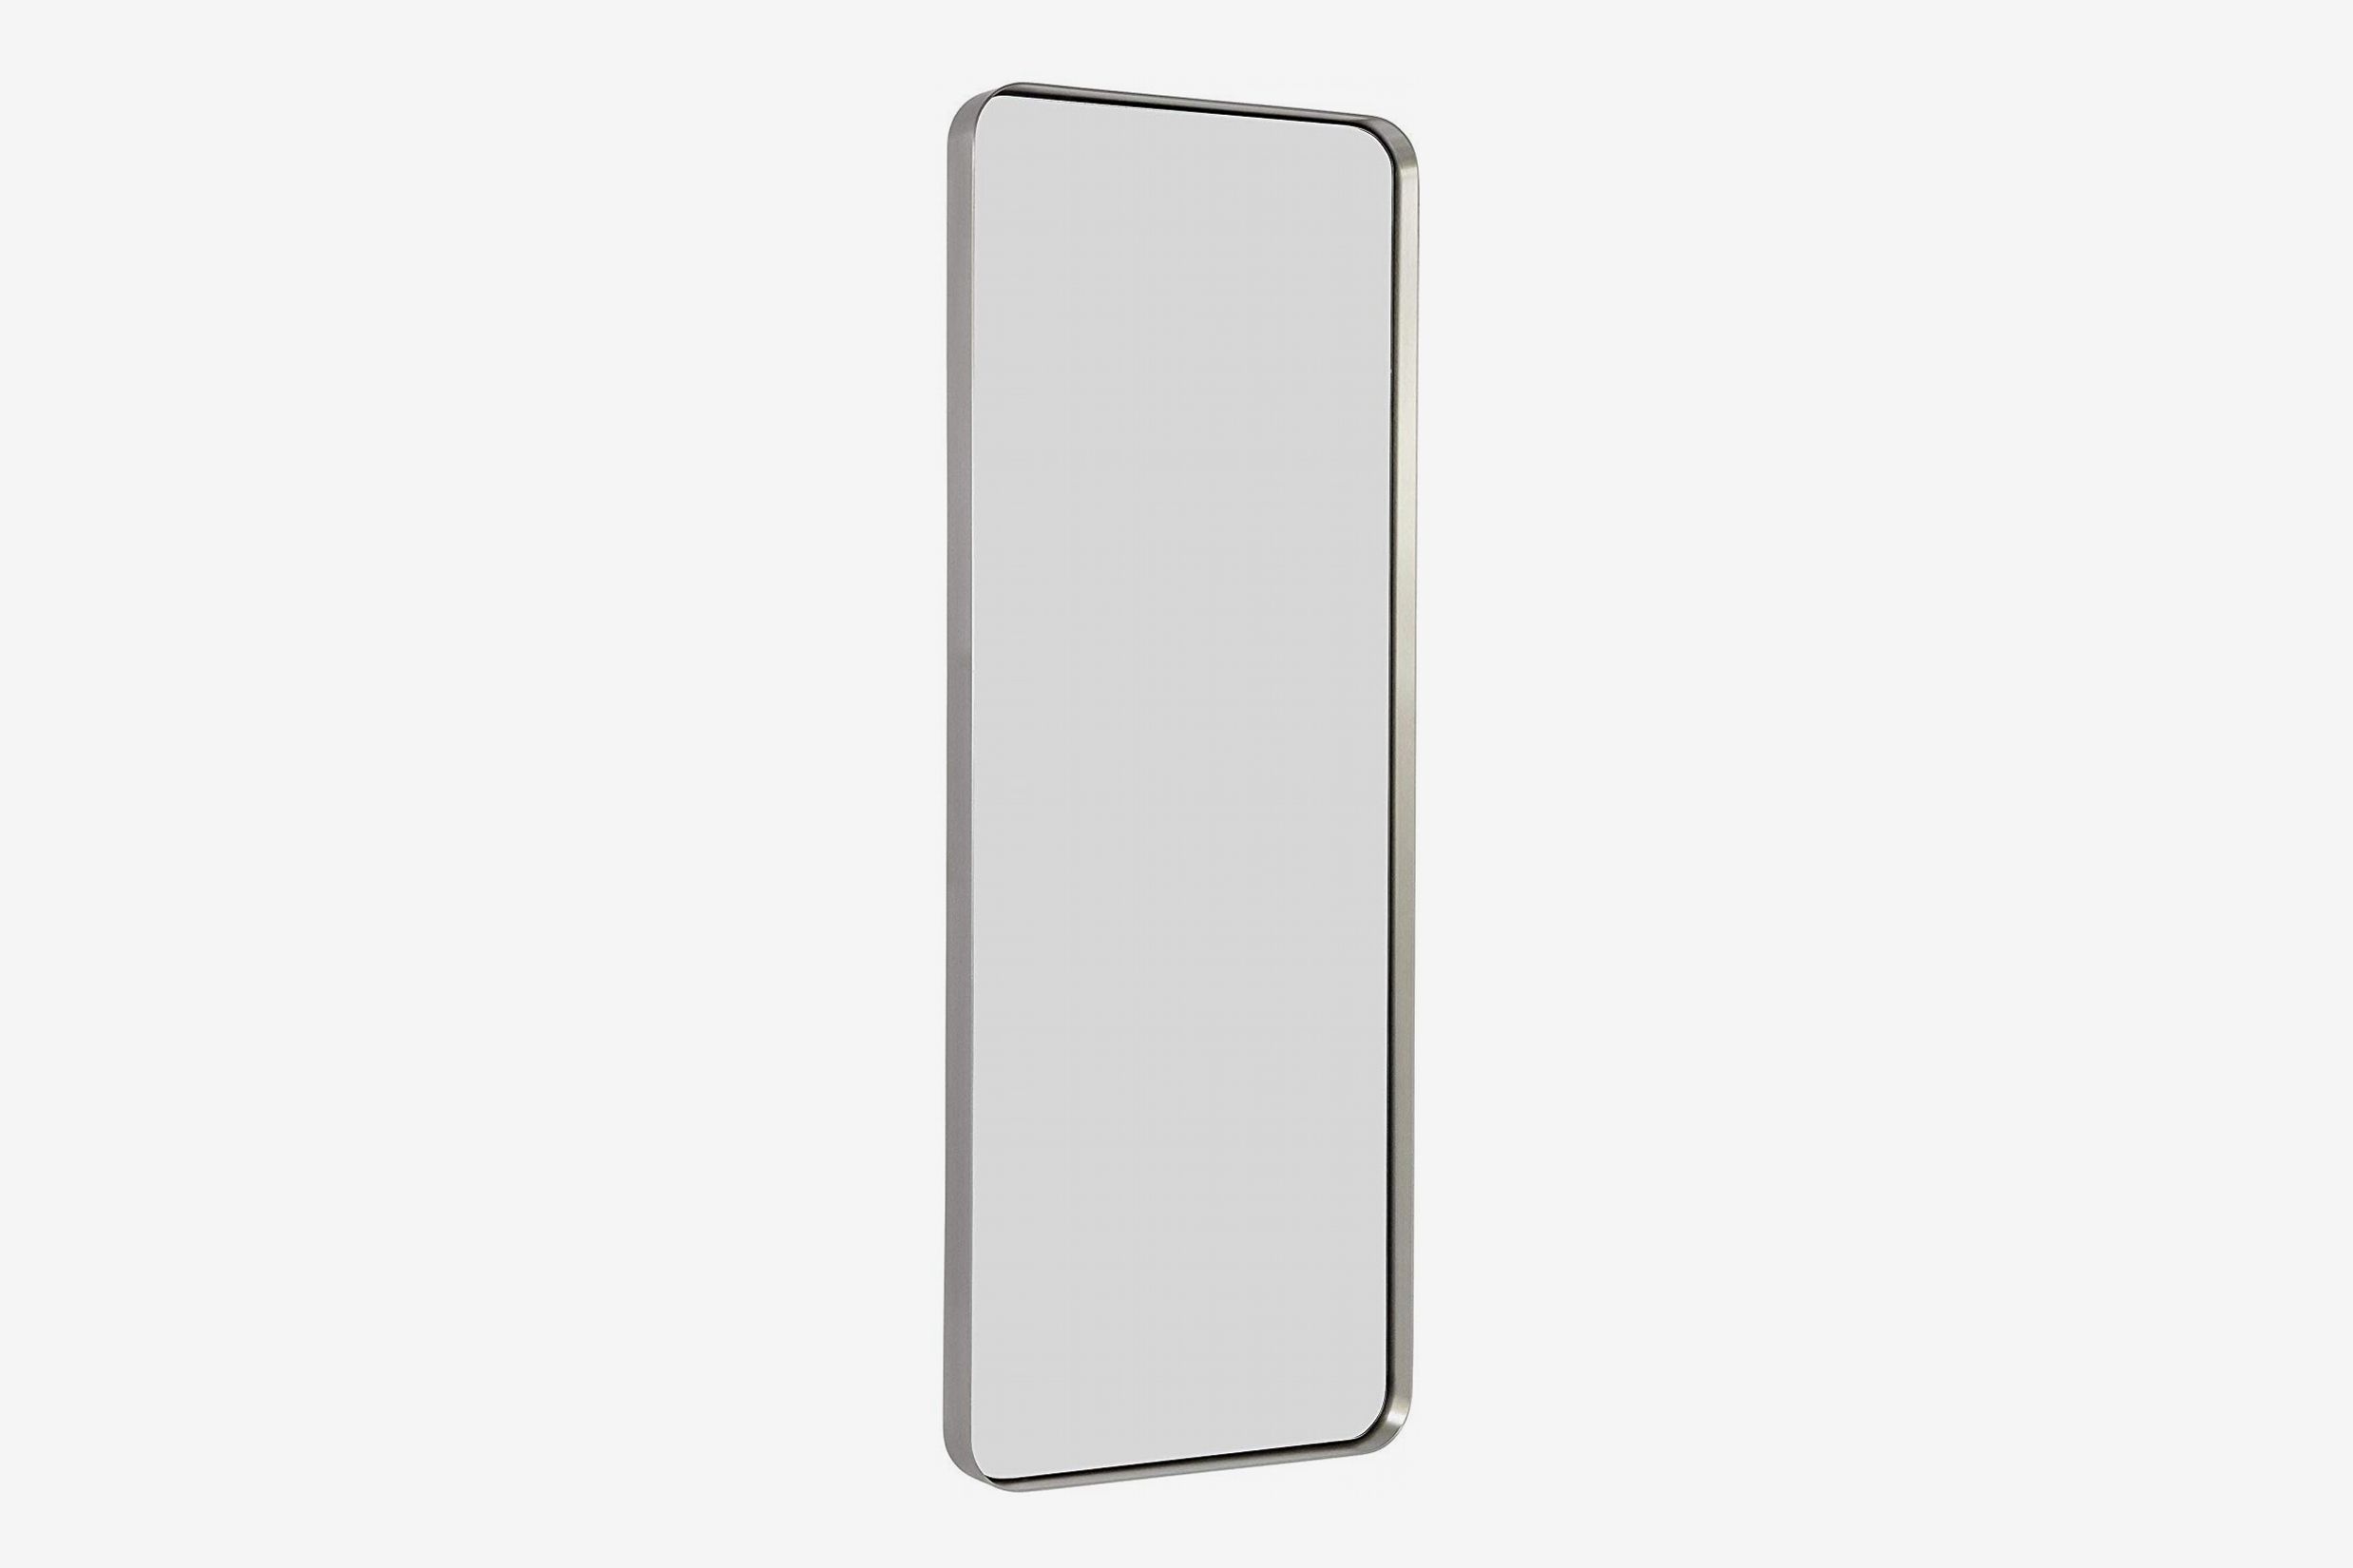 8 Best Full Length Mirrors To 2019, Height To Hang Full Length Mirror On Wall